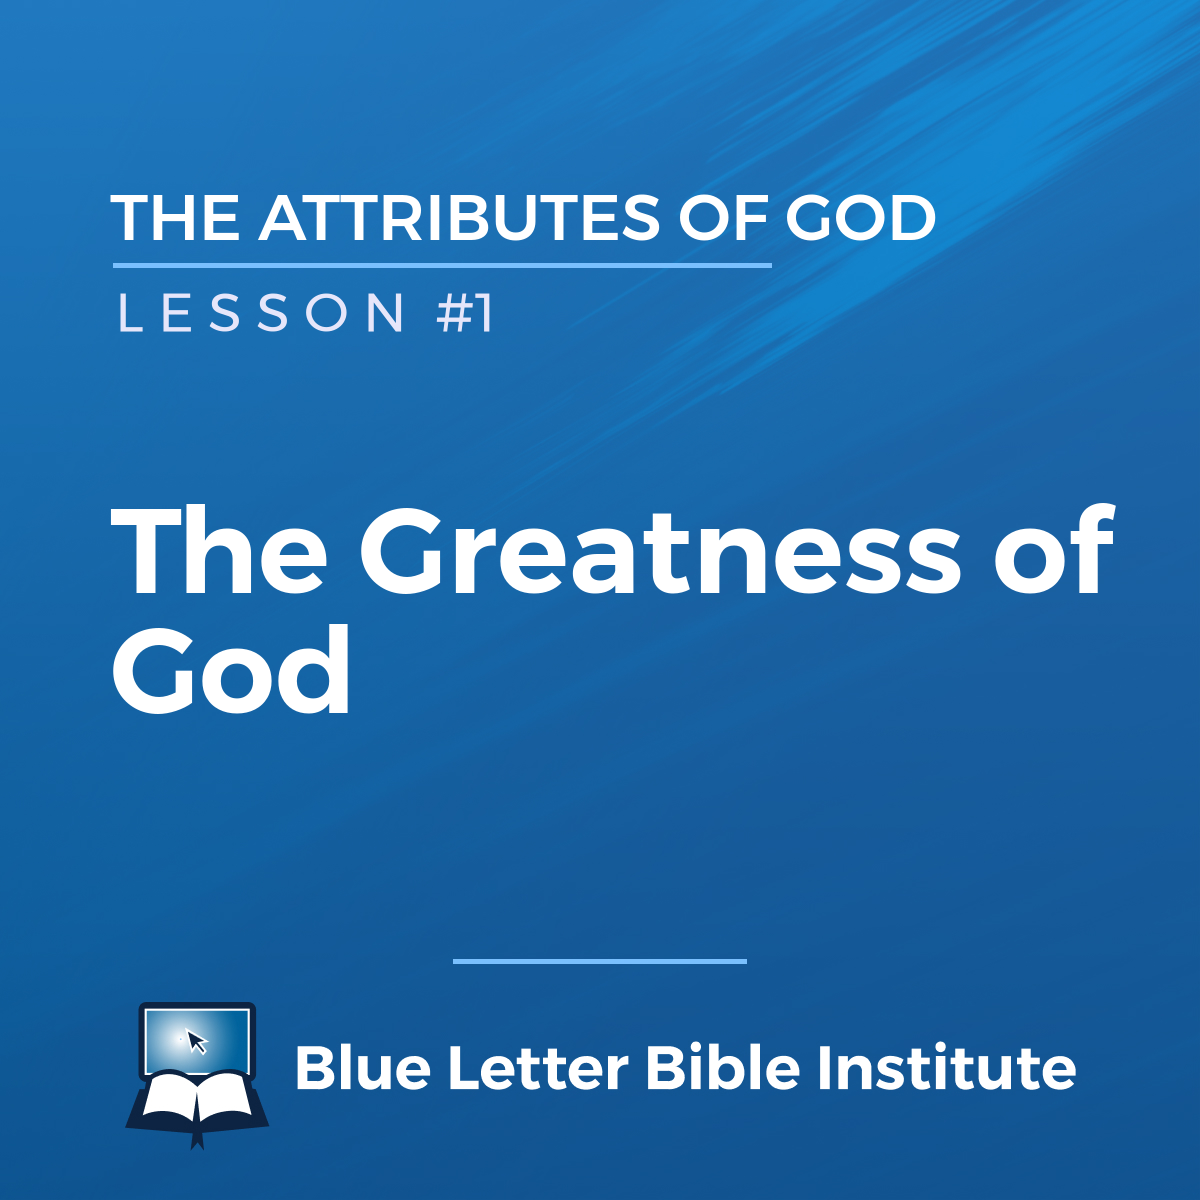 greatness of god